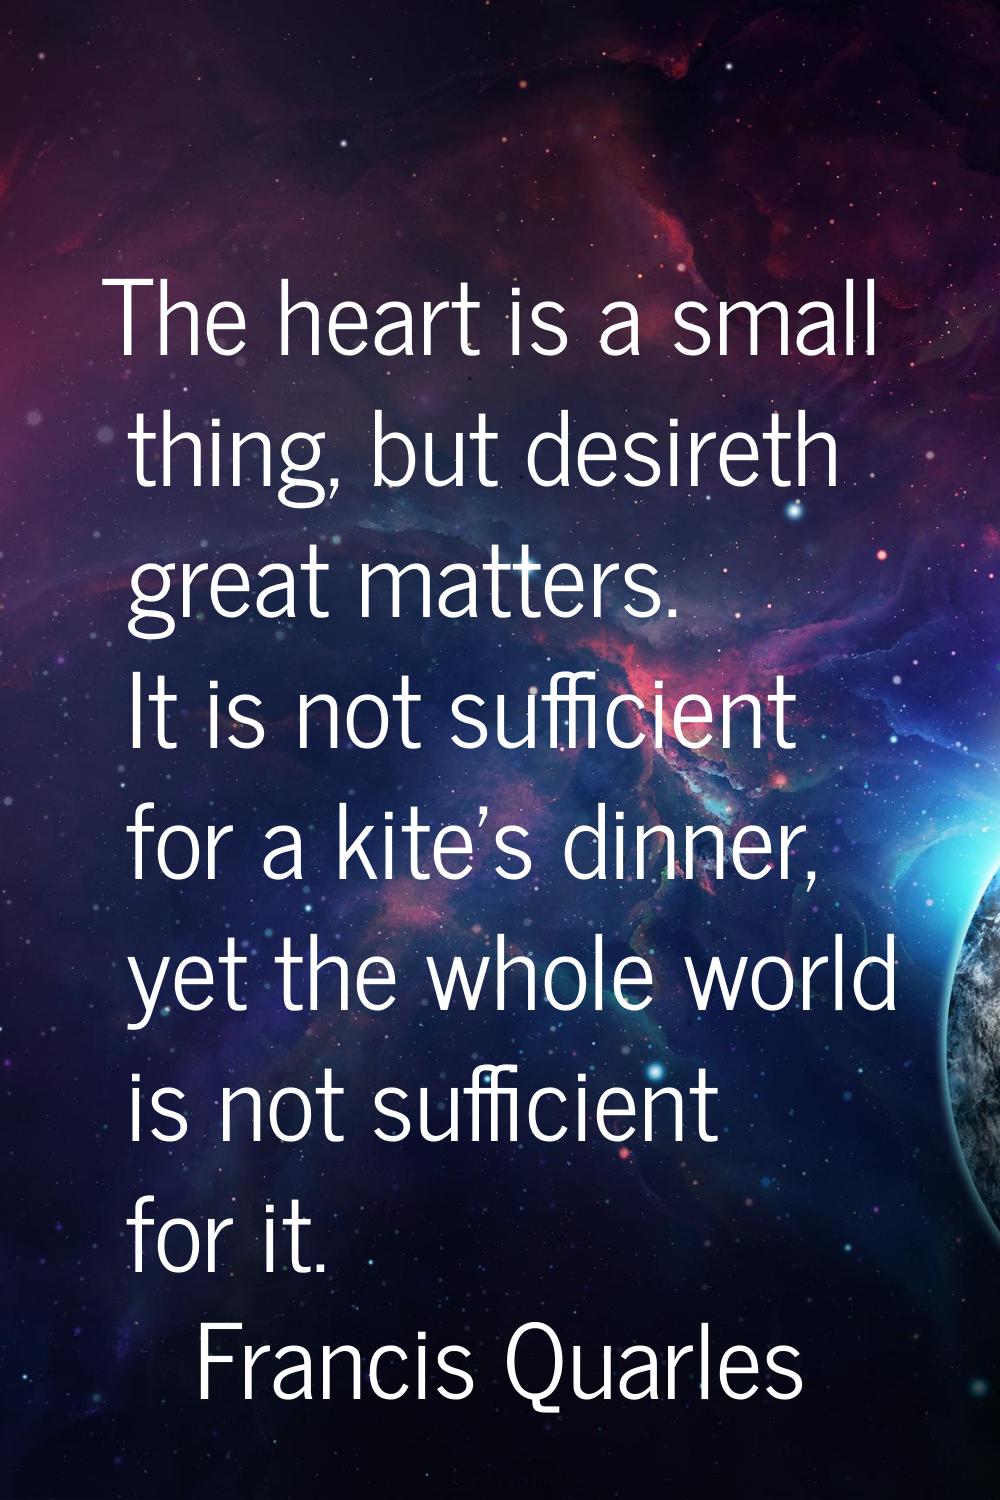 The heart is a small thing, but desireth great matters. It is not sufficient for a kite's dinner, y